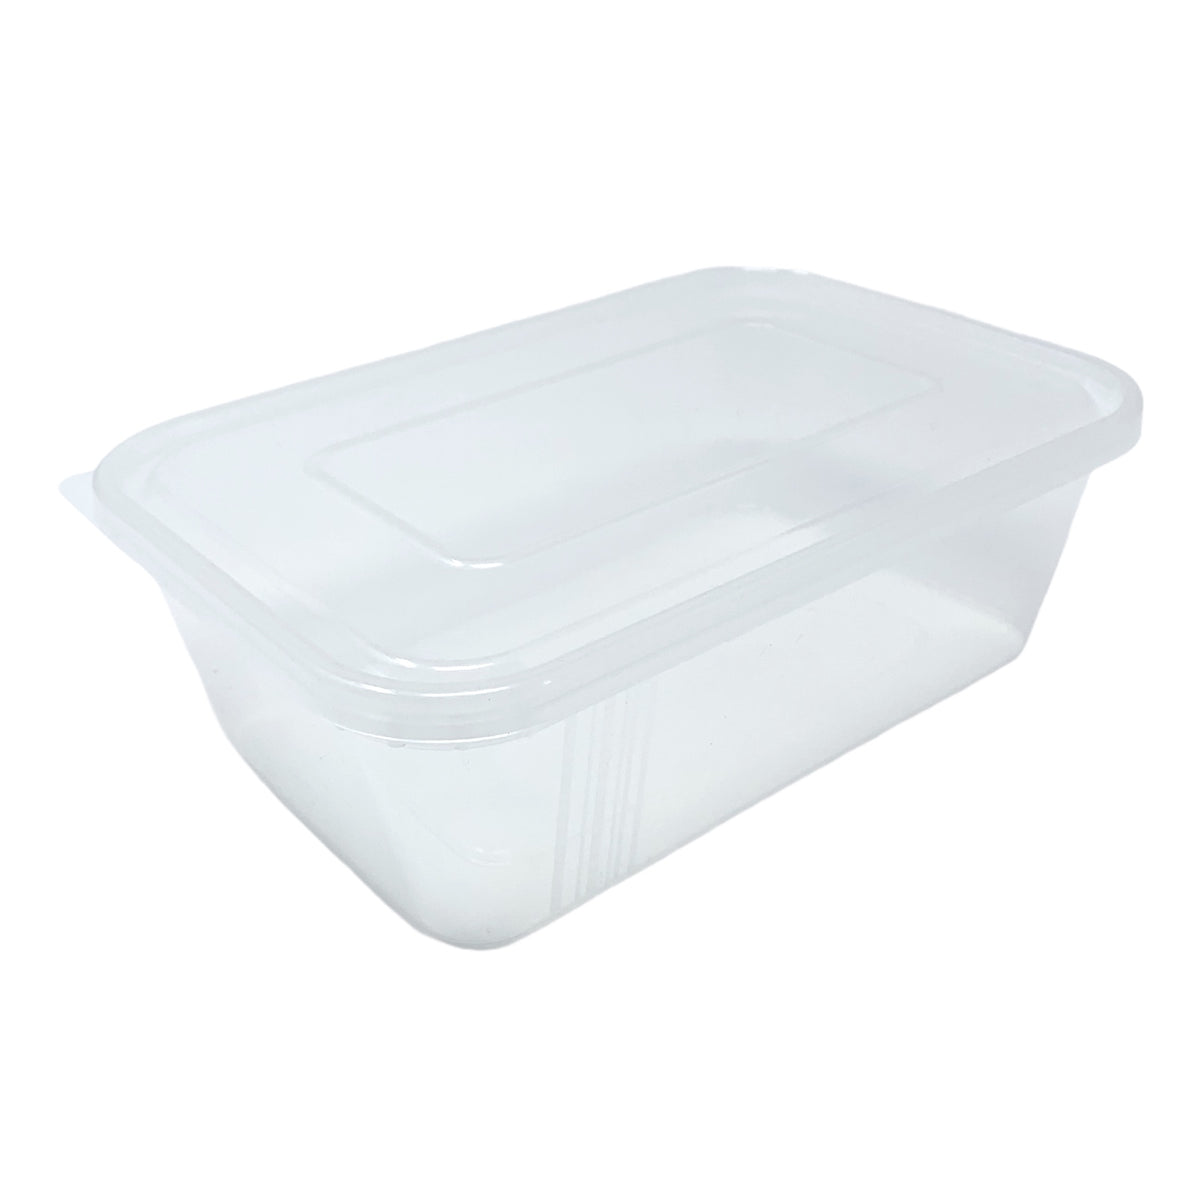 650ml Heavy Duty Microwave Container & Lids